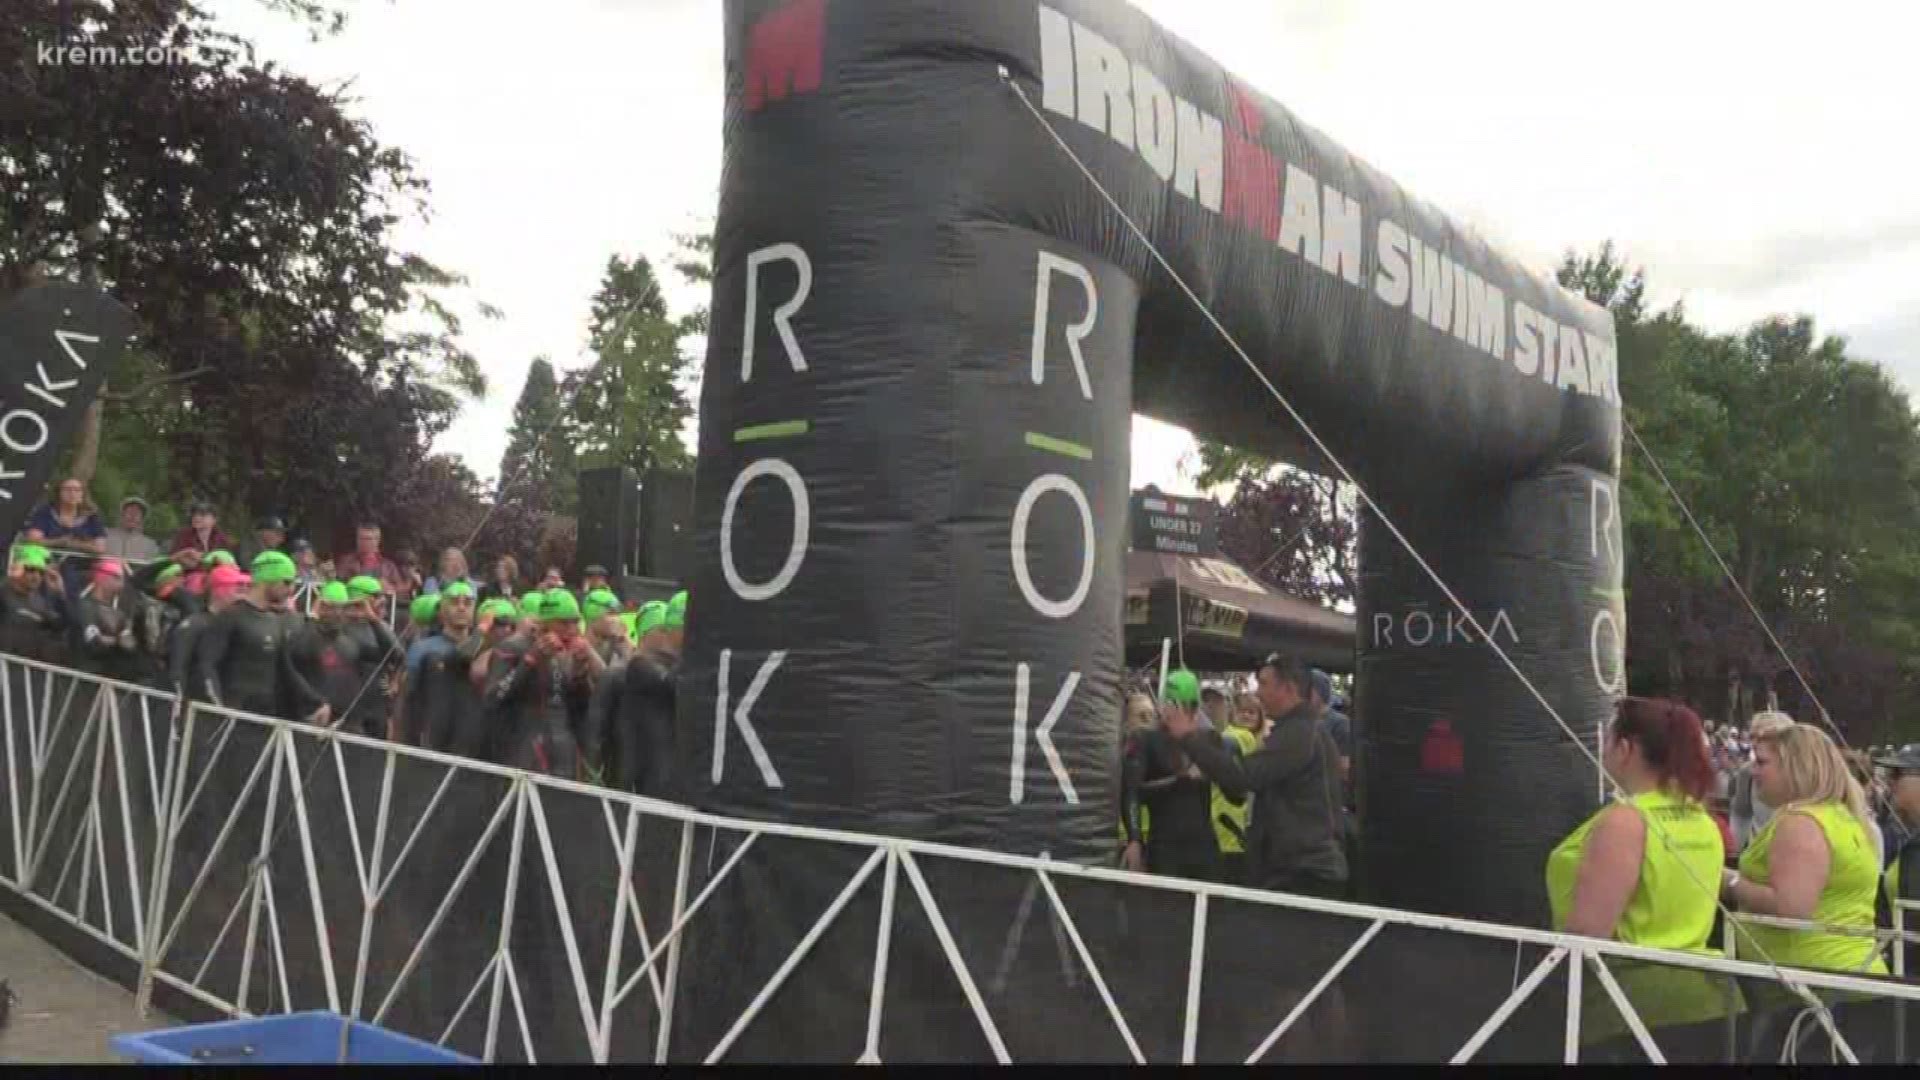 KREM Reporter Amanda Roley captured some of the highlights from the 2019 Coeur d'Alene Ironman 70.3.